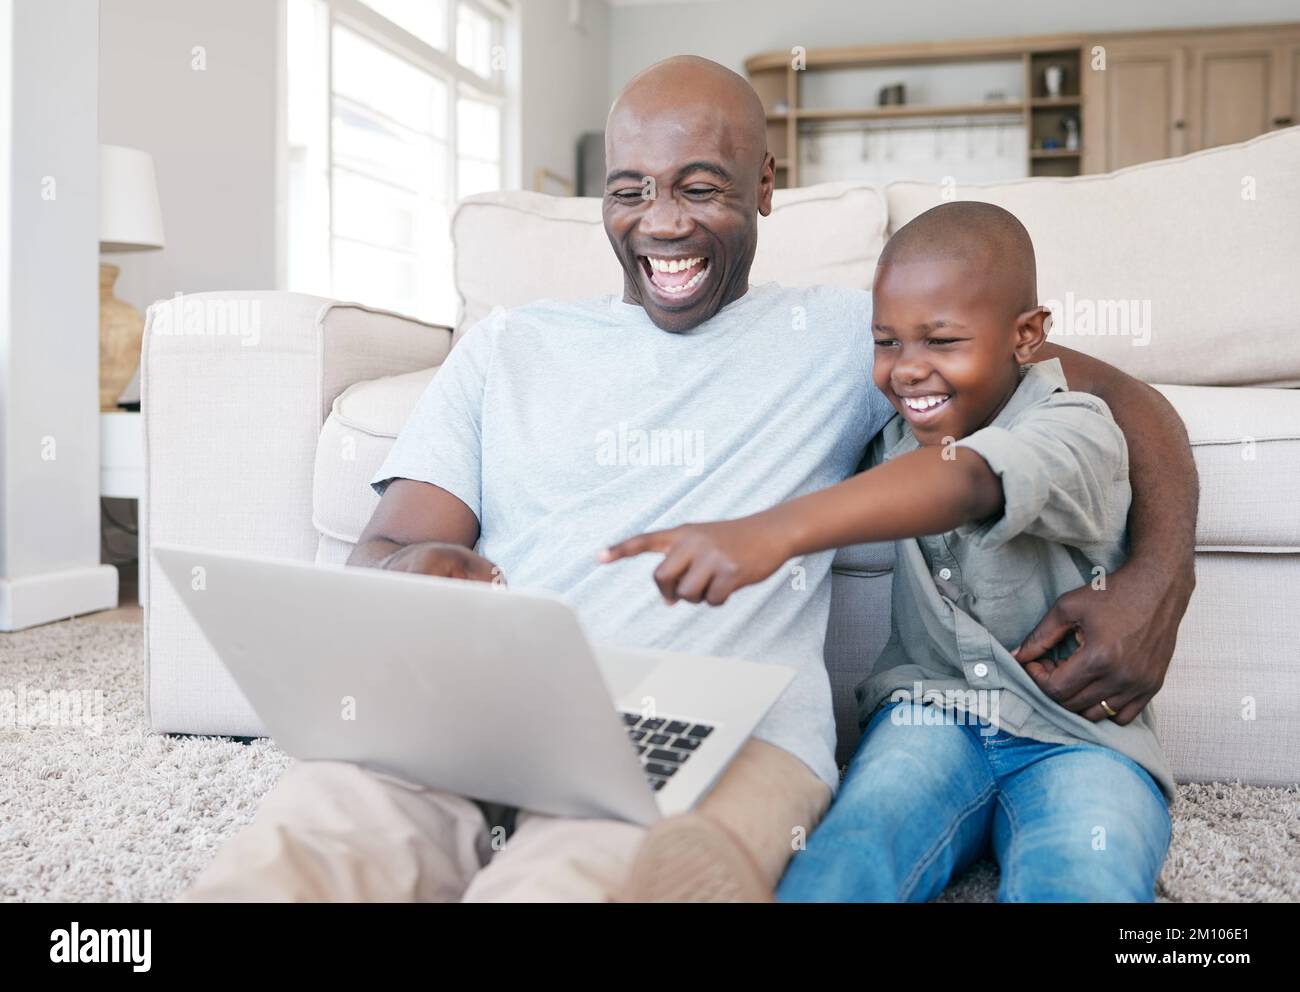 My family is my life. a father and son using a laptop on the sofa at home. Stock Photo